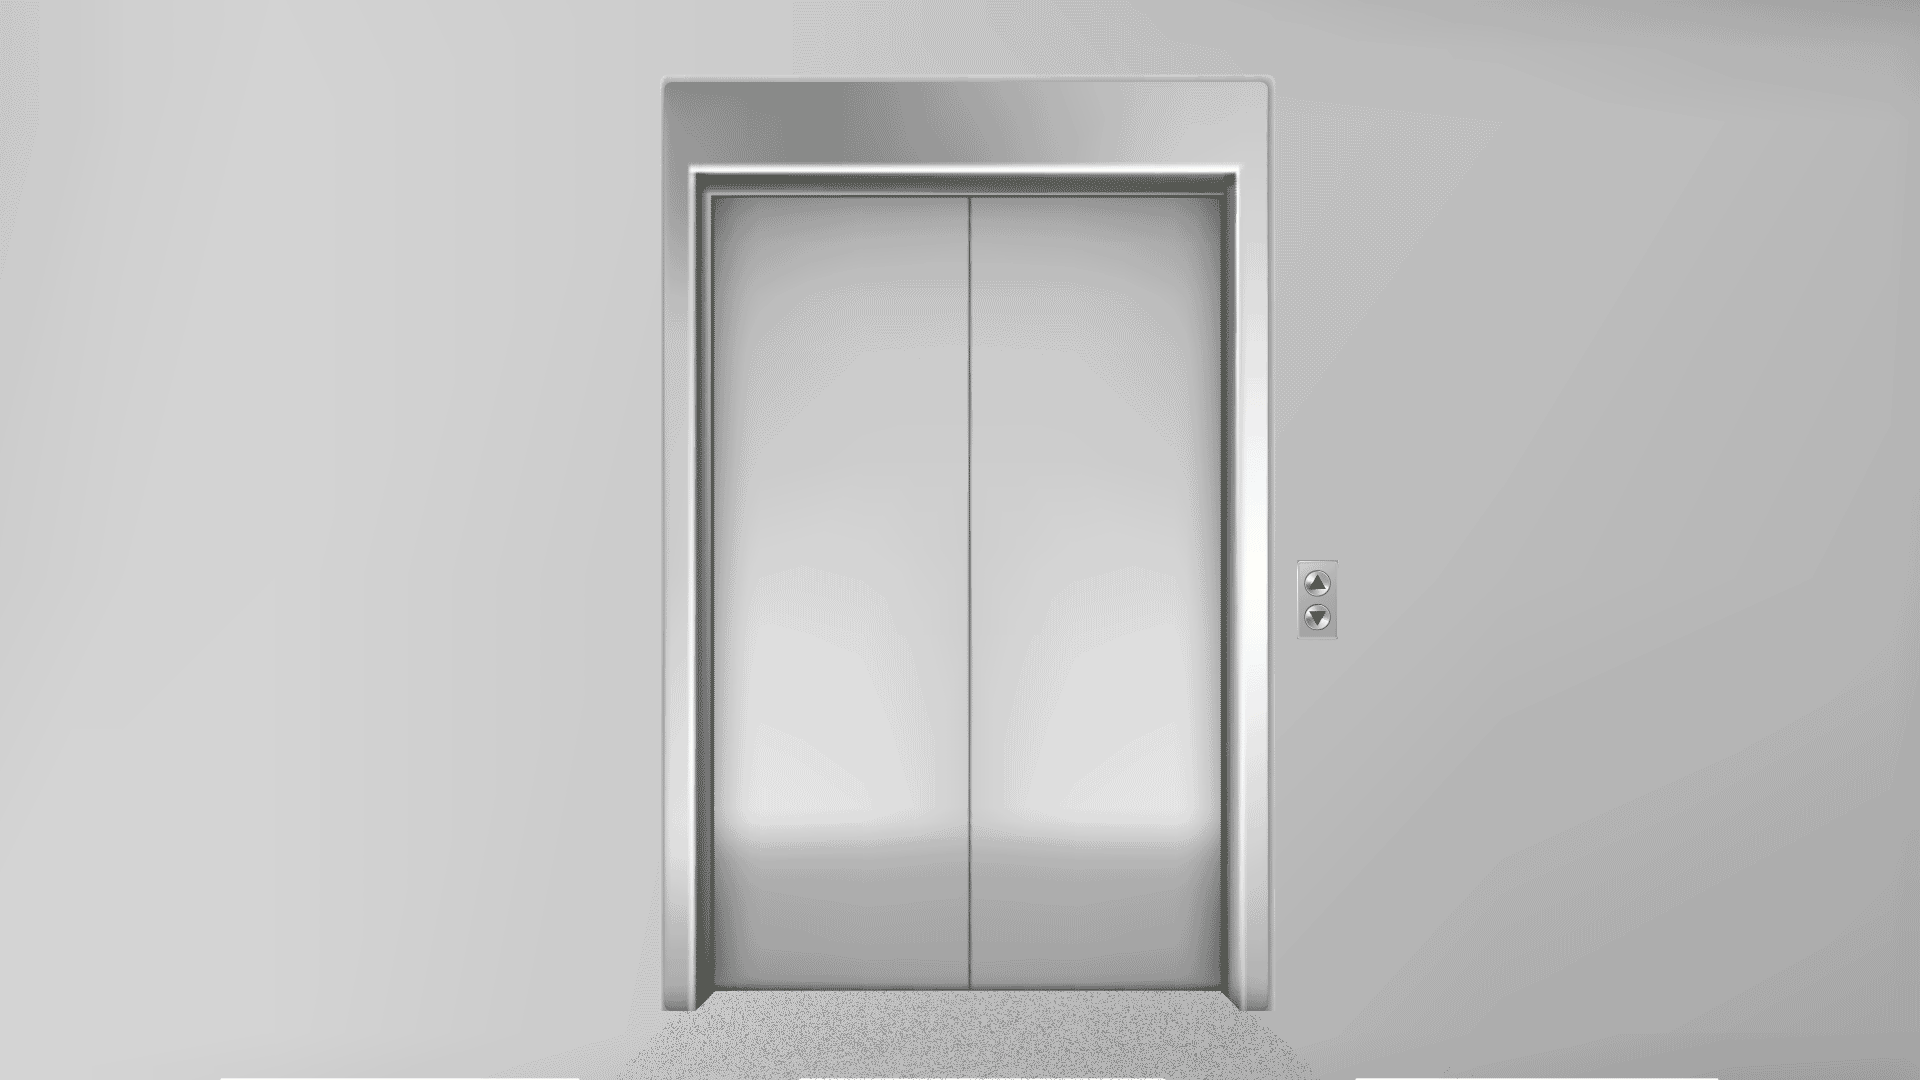 Animated illustration of an elevator door opening revealing a large pile of cash.